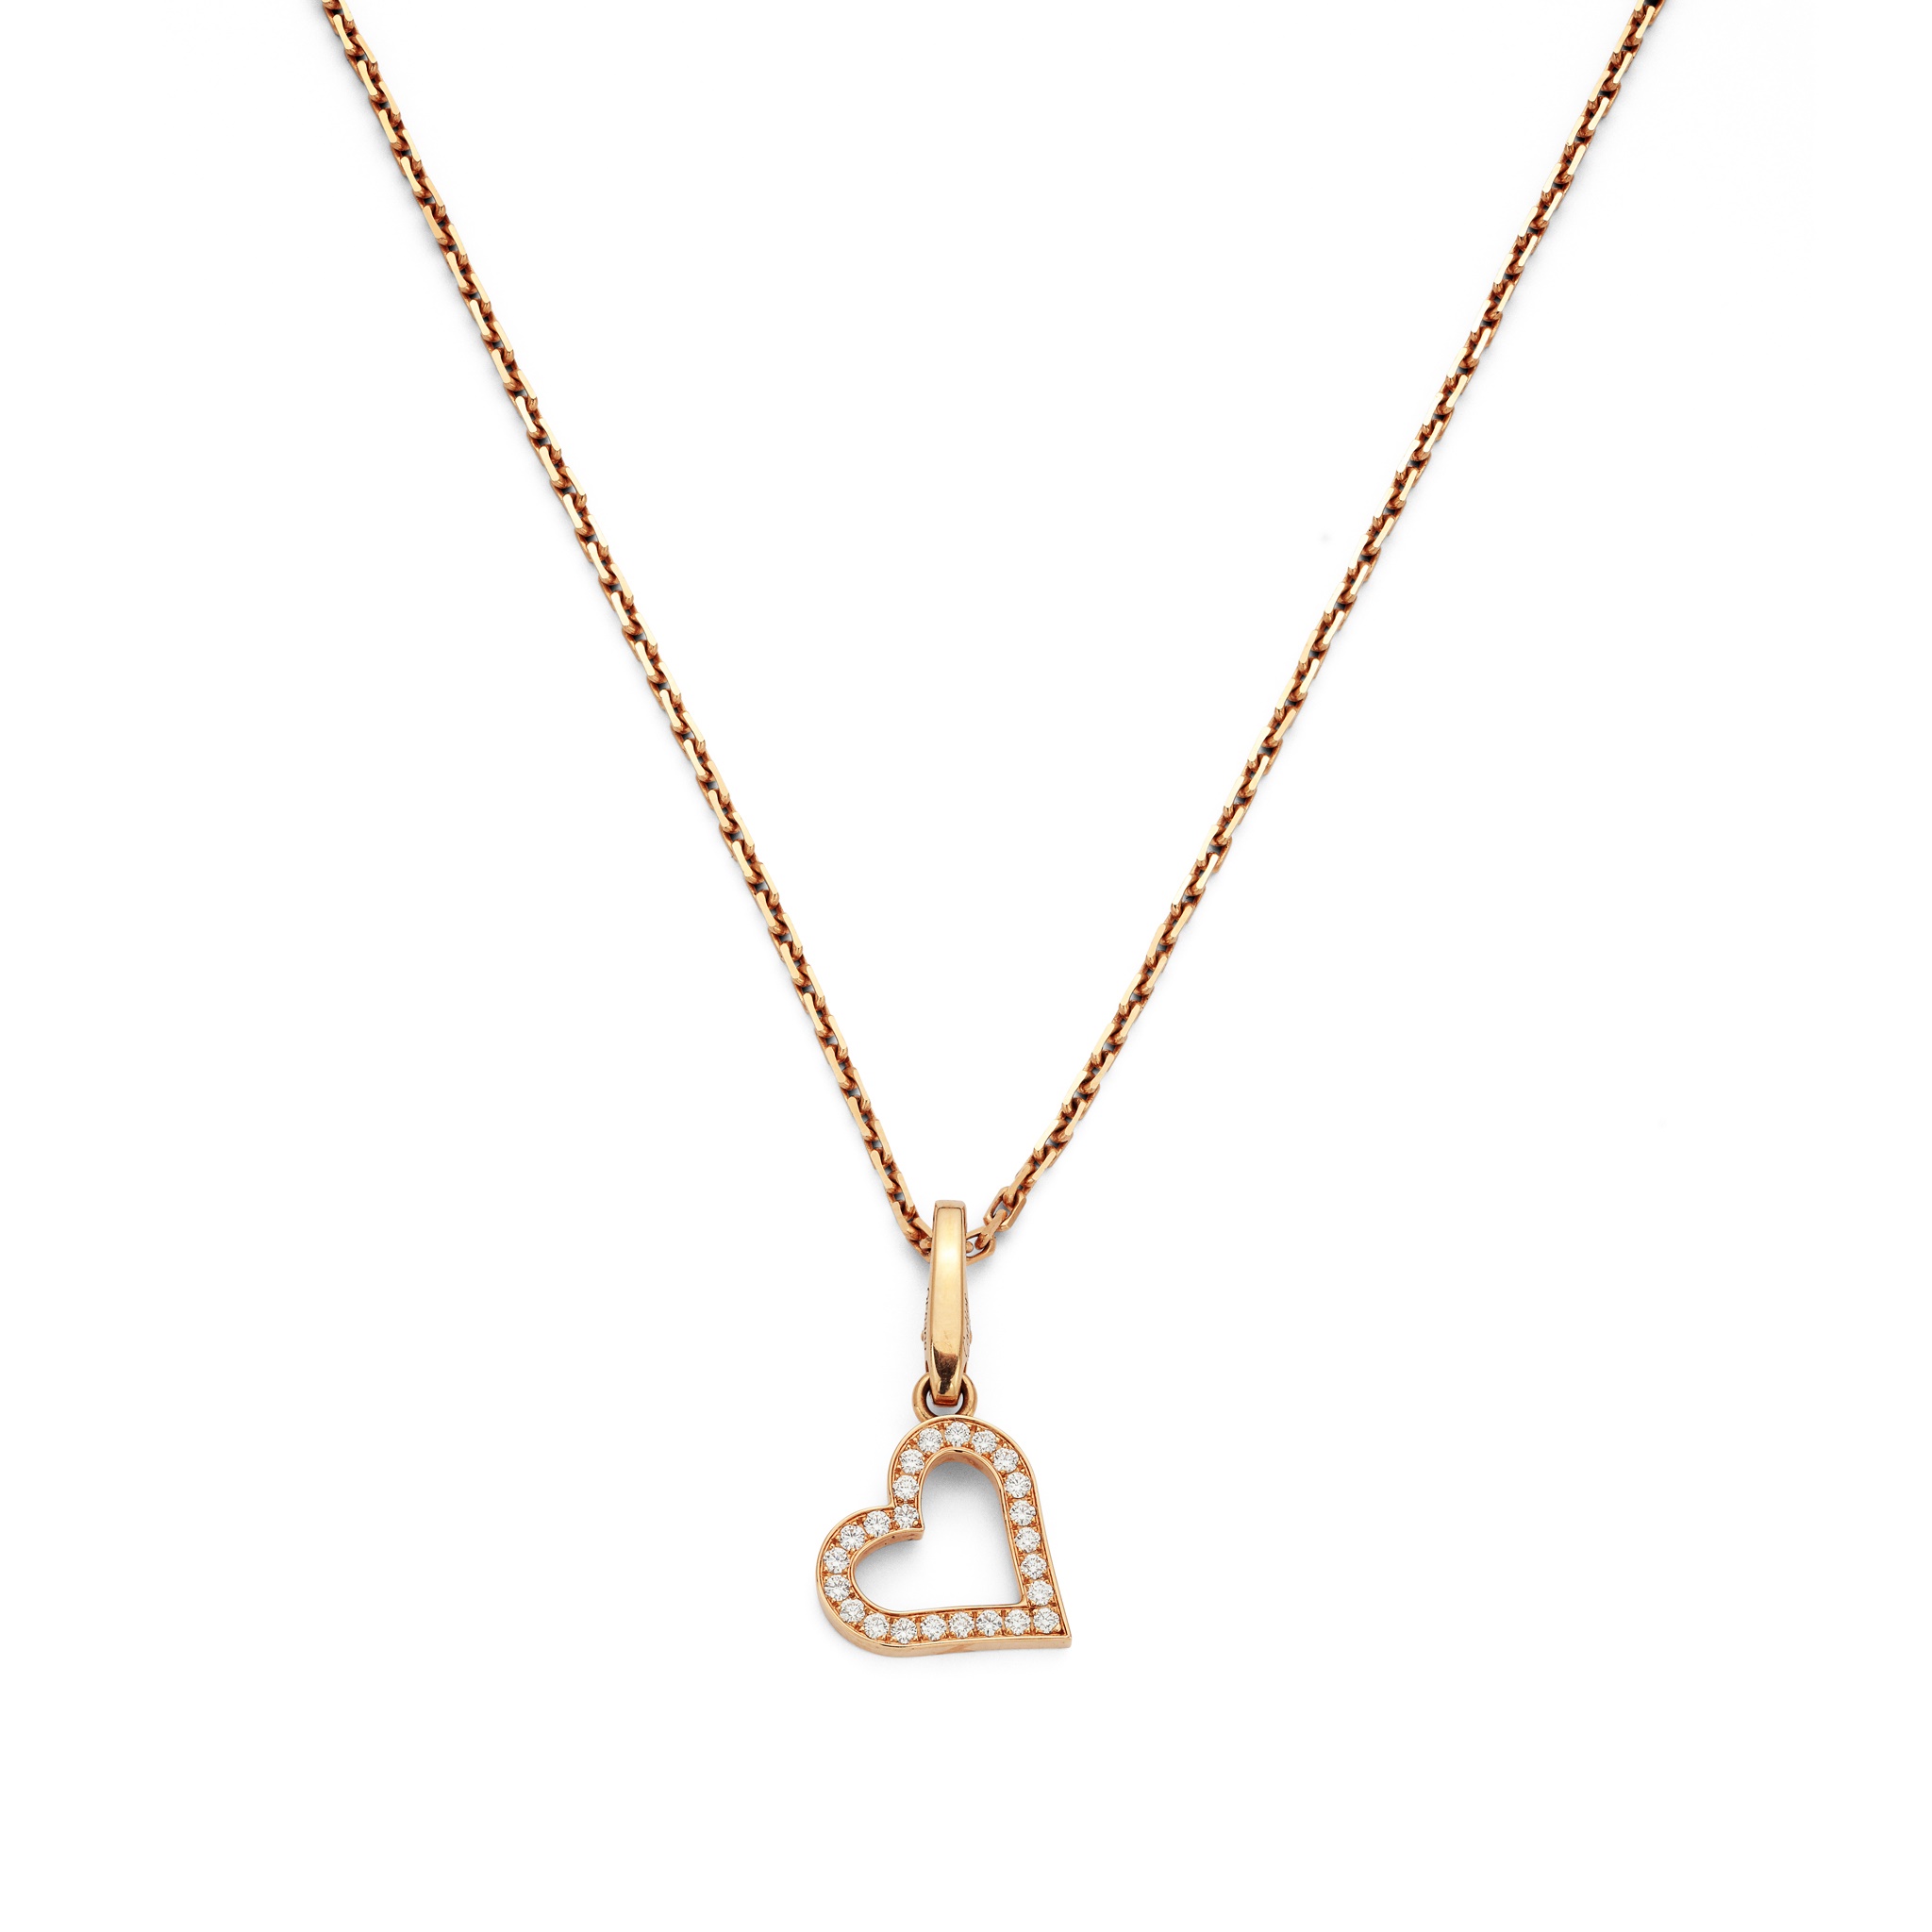 A diamond-set pendant necklace, by Cartier The openwork heart-shaped charm pendant, suspended from a